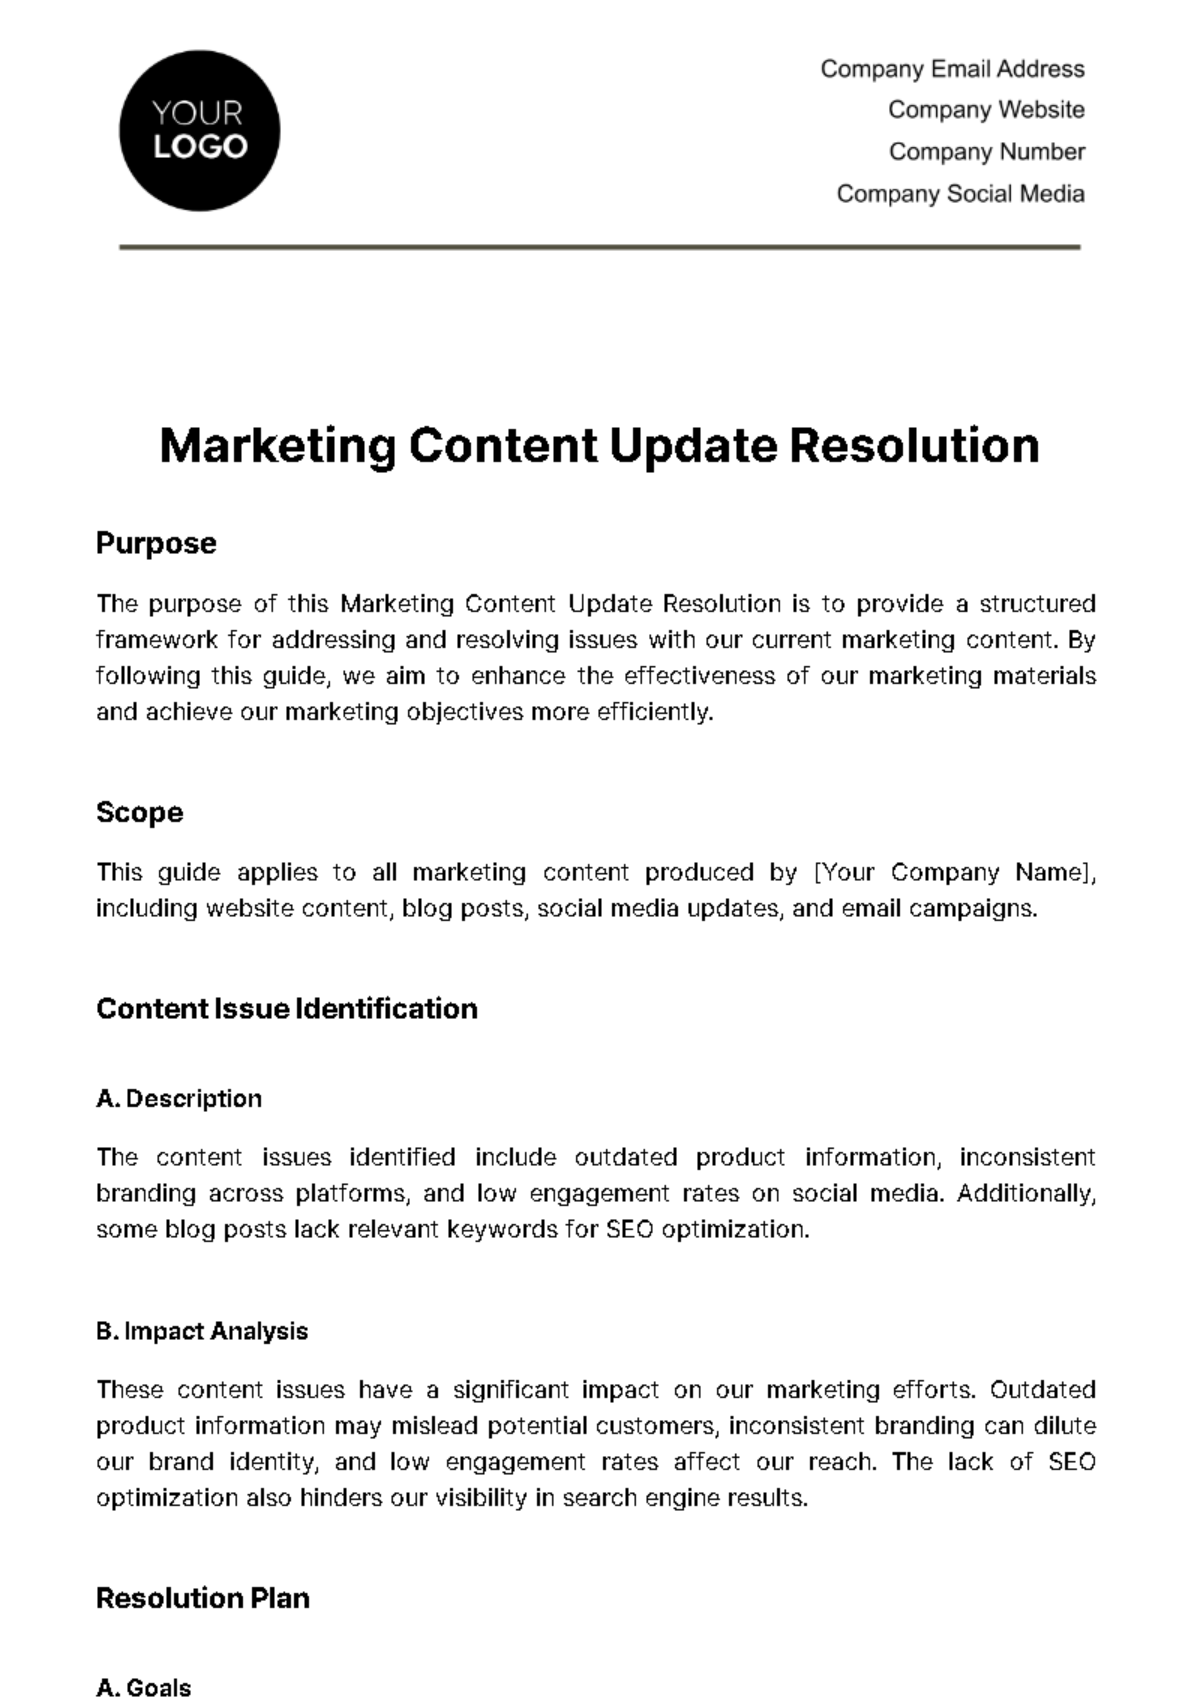 Free Marketing Content Update Resolution Template